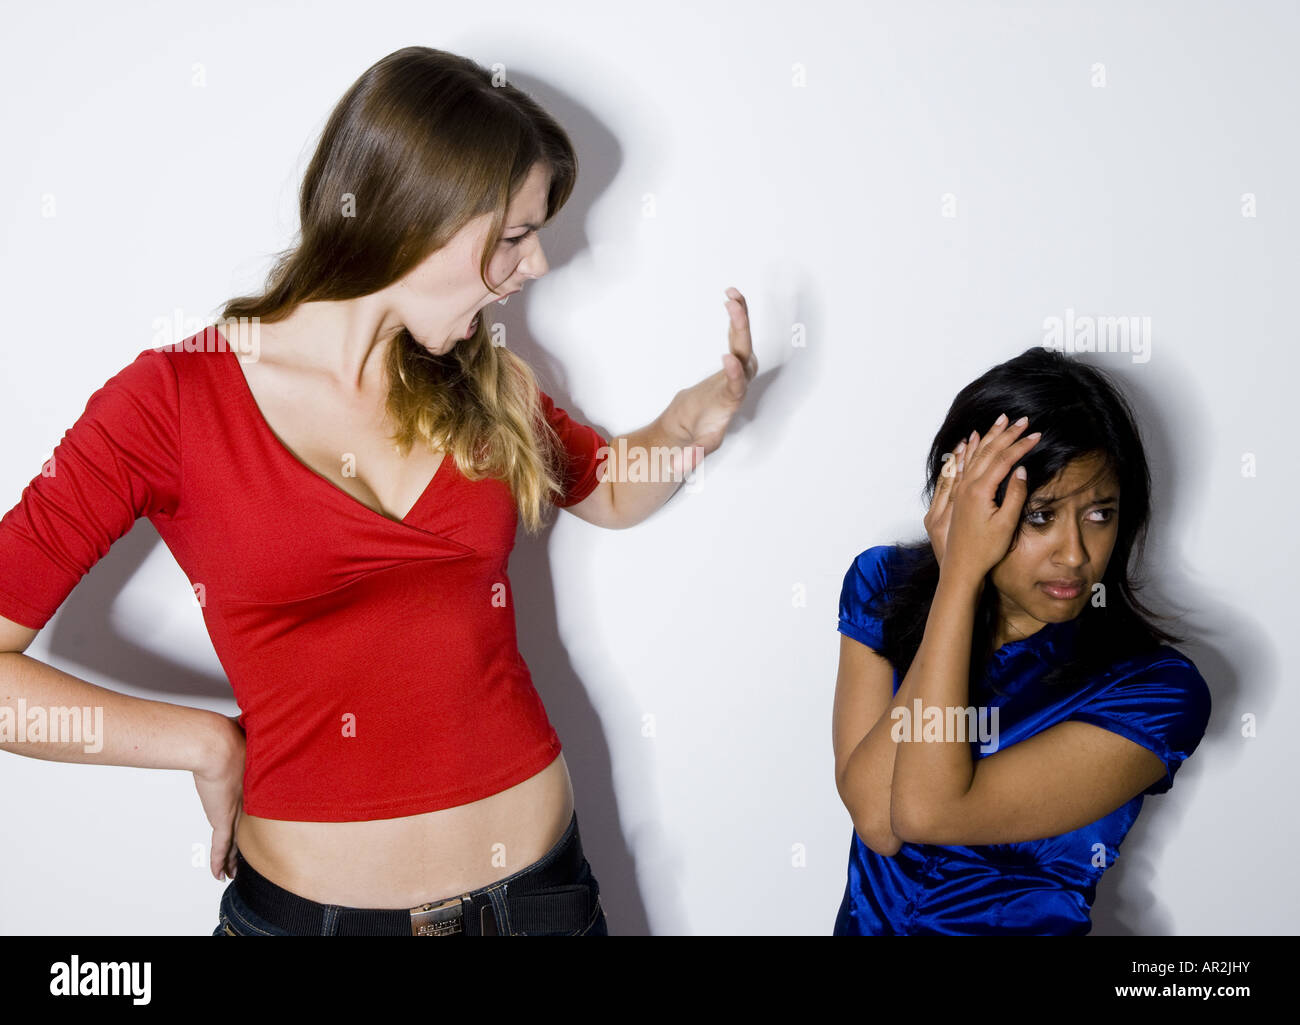 two young women, one aggressiv, the other fearful Stock Photo